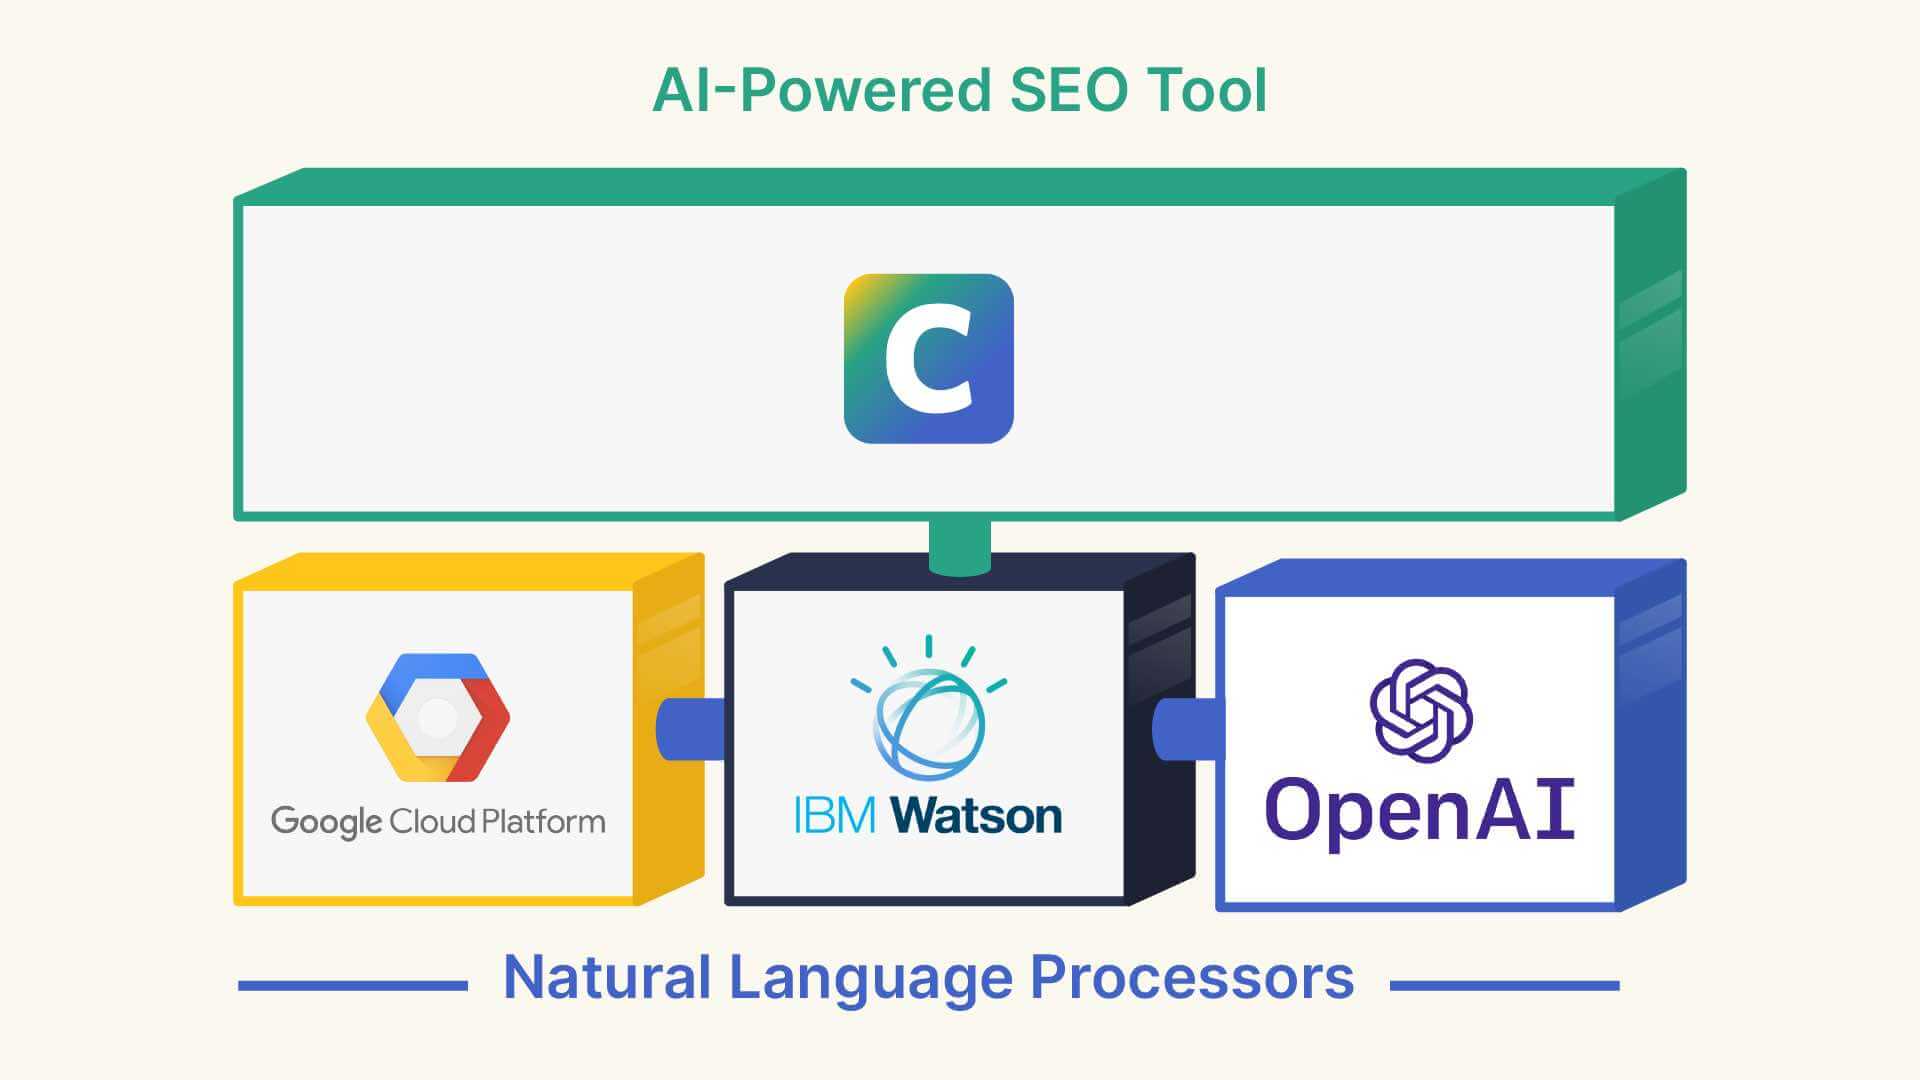 Clearscope uses world-class models from Google Cloud Platform, IBM Watson, and OpenAI.